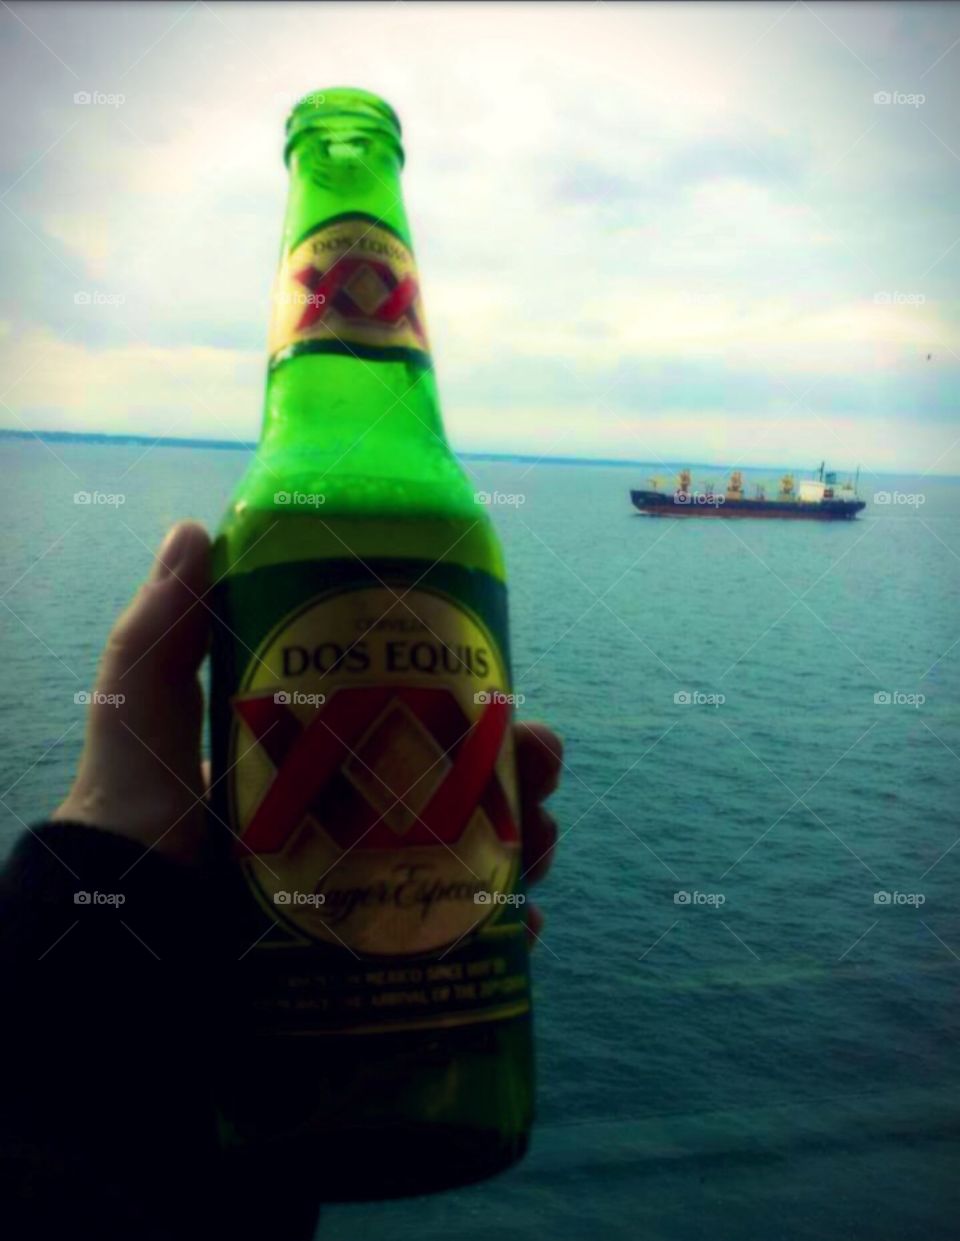 Dos equis, beer on the sea.. Cruise on Vision of the Seas. 